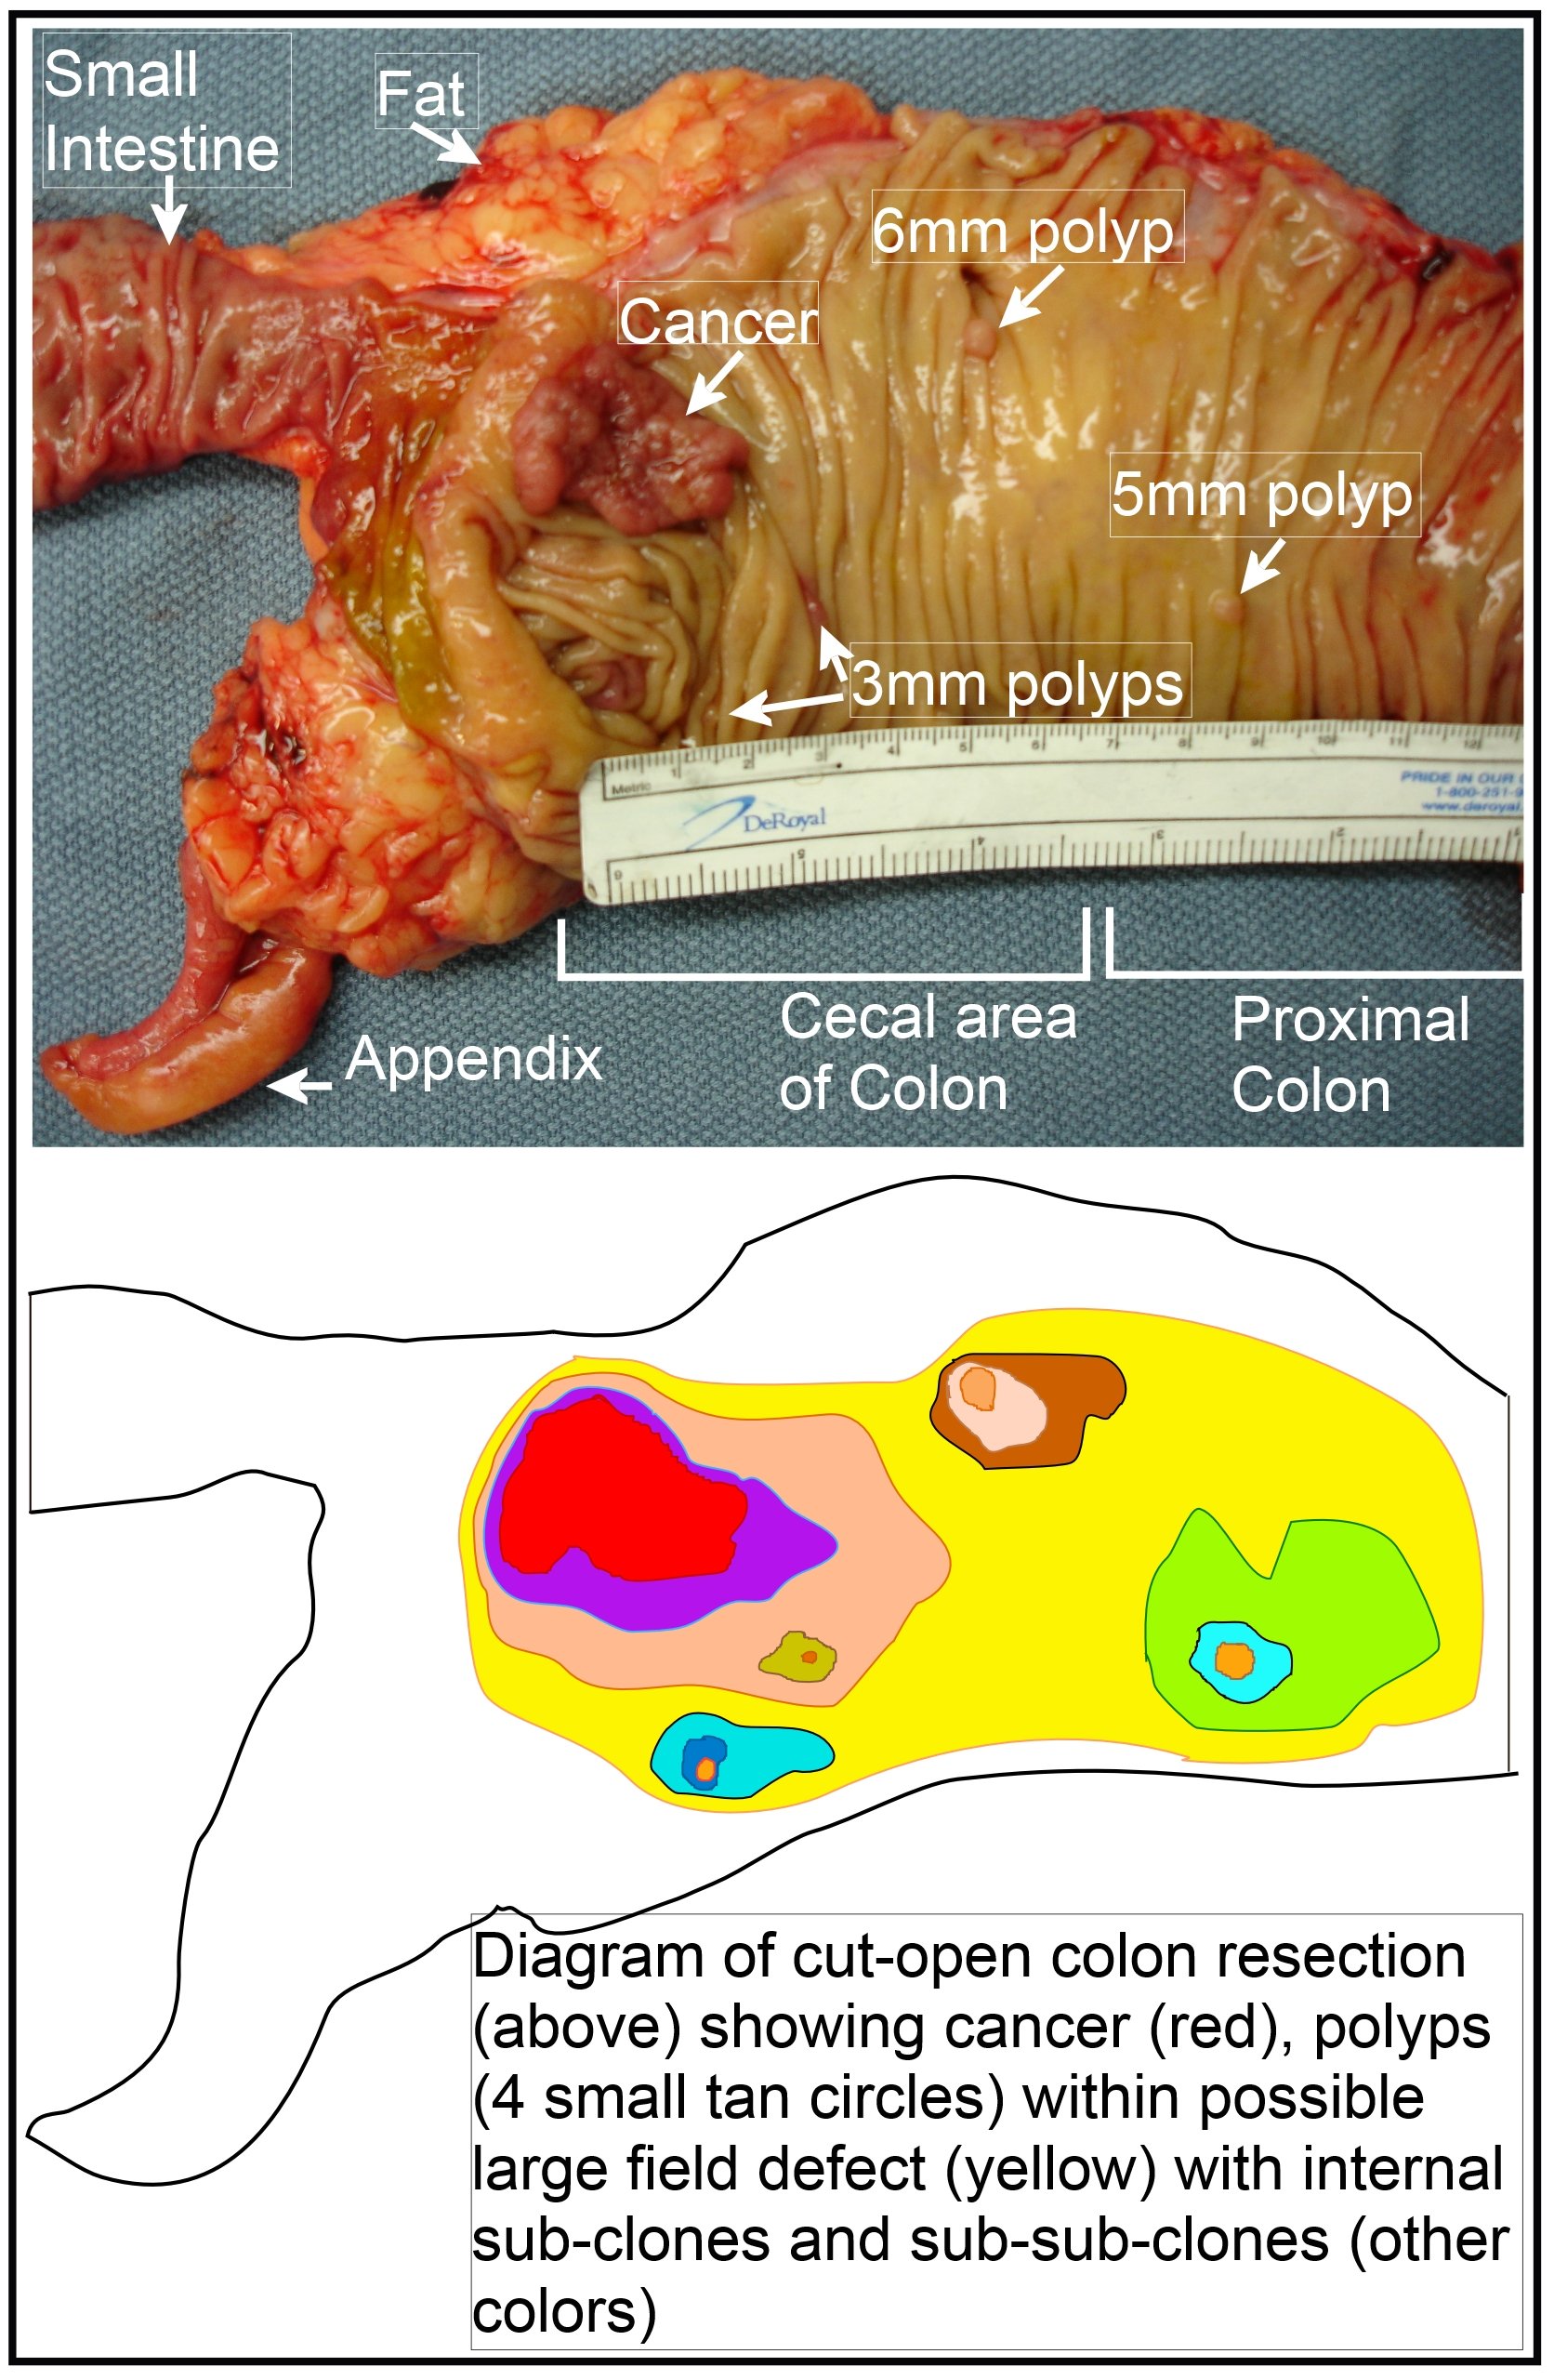 File:Image of resected colon segment with cancer & 4 nearby polyps plus schematic of field defects with sub-clones.jpg